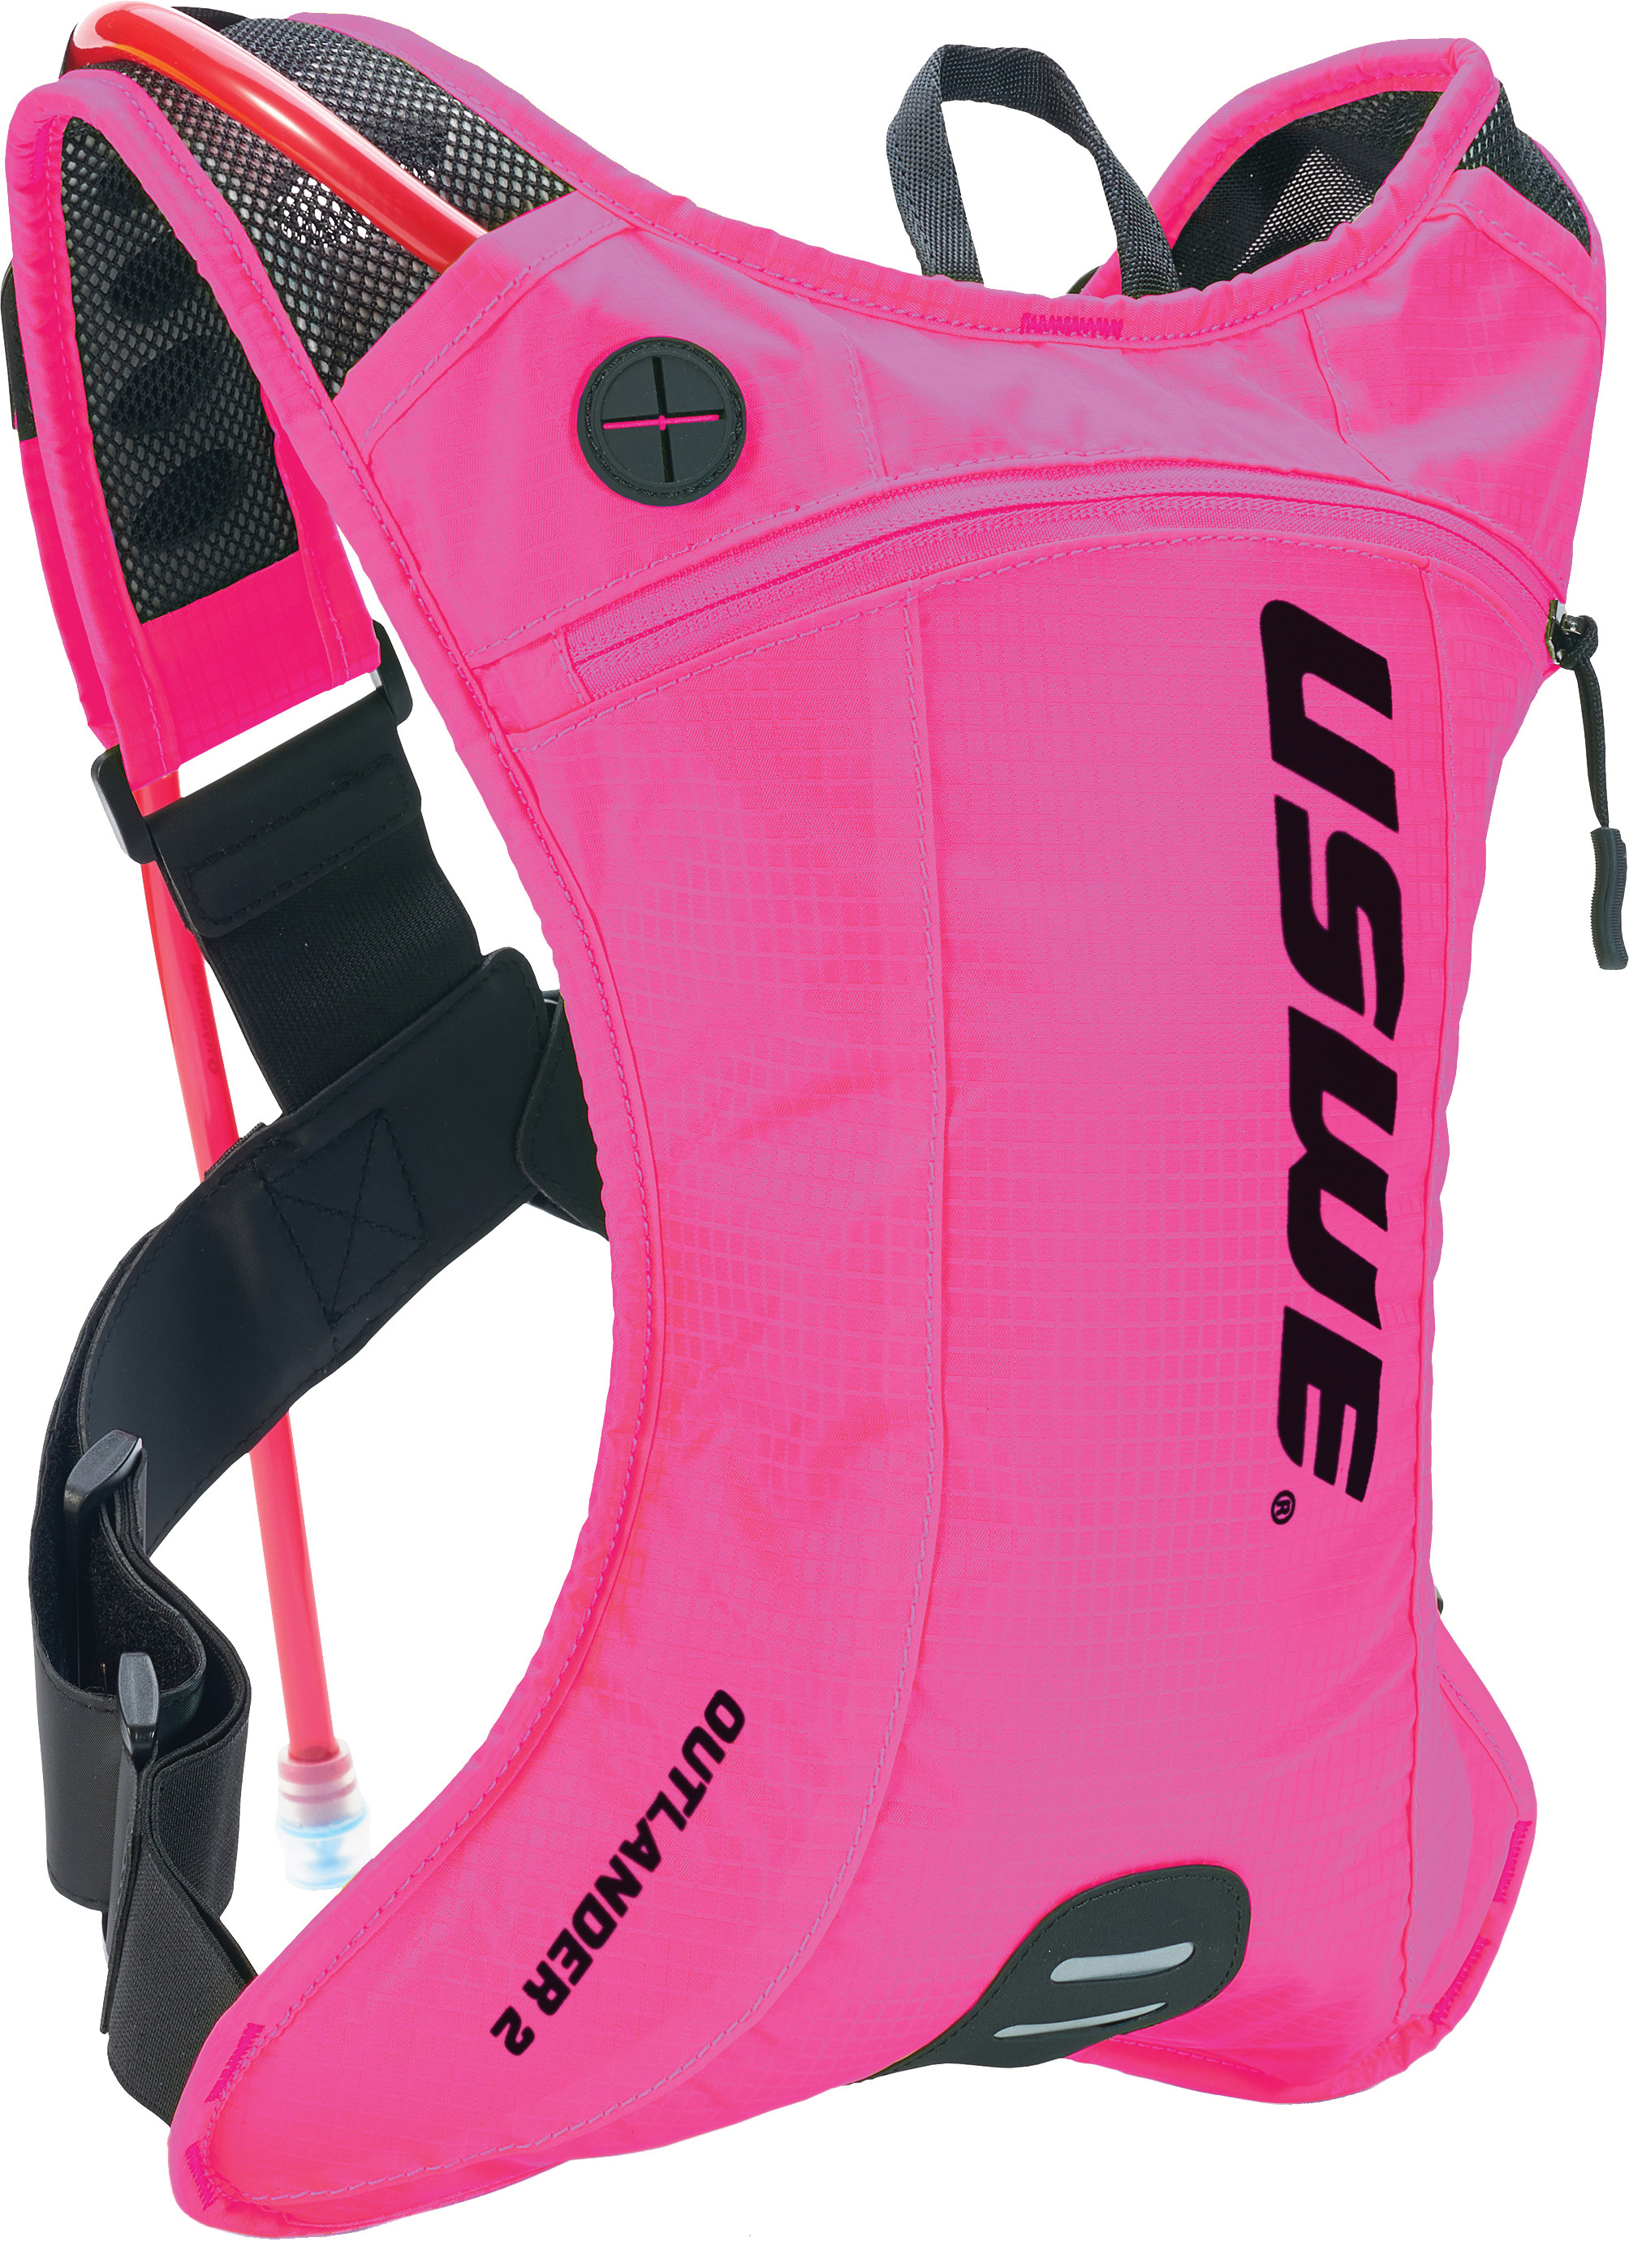 Outlander 2 1.5L Hydration System w/ Elite Bladder & Fixed Tube - Race Pink - Click Image to Close